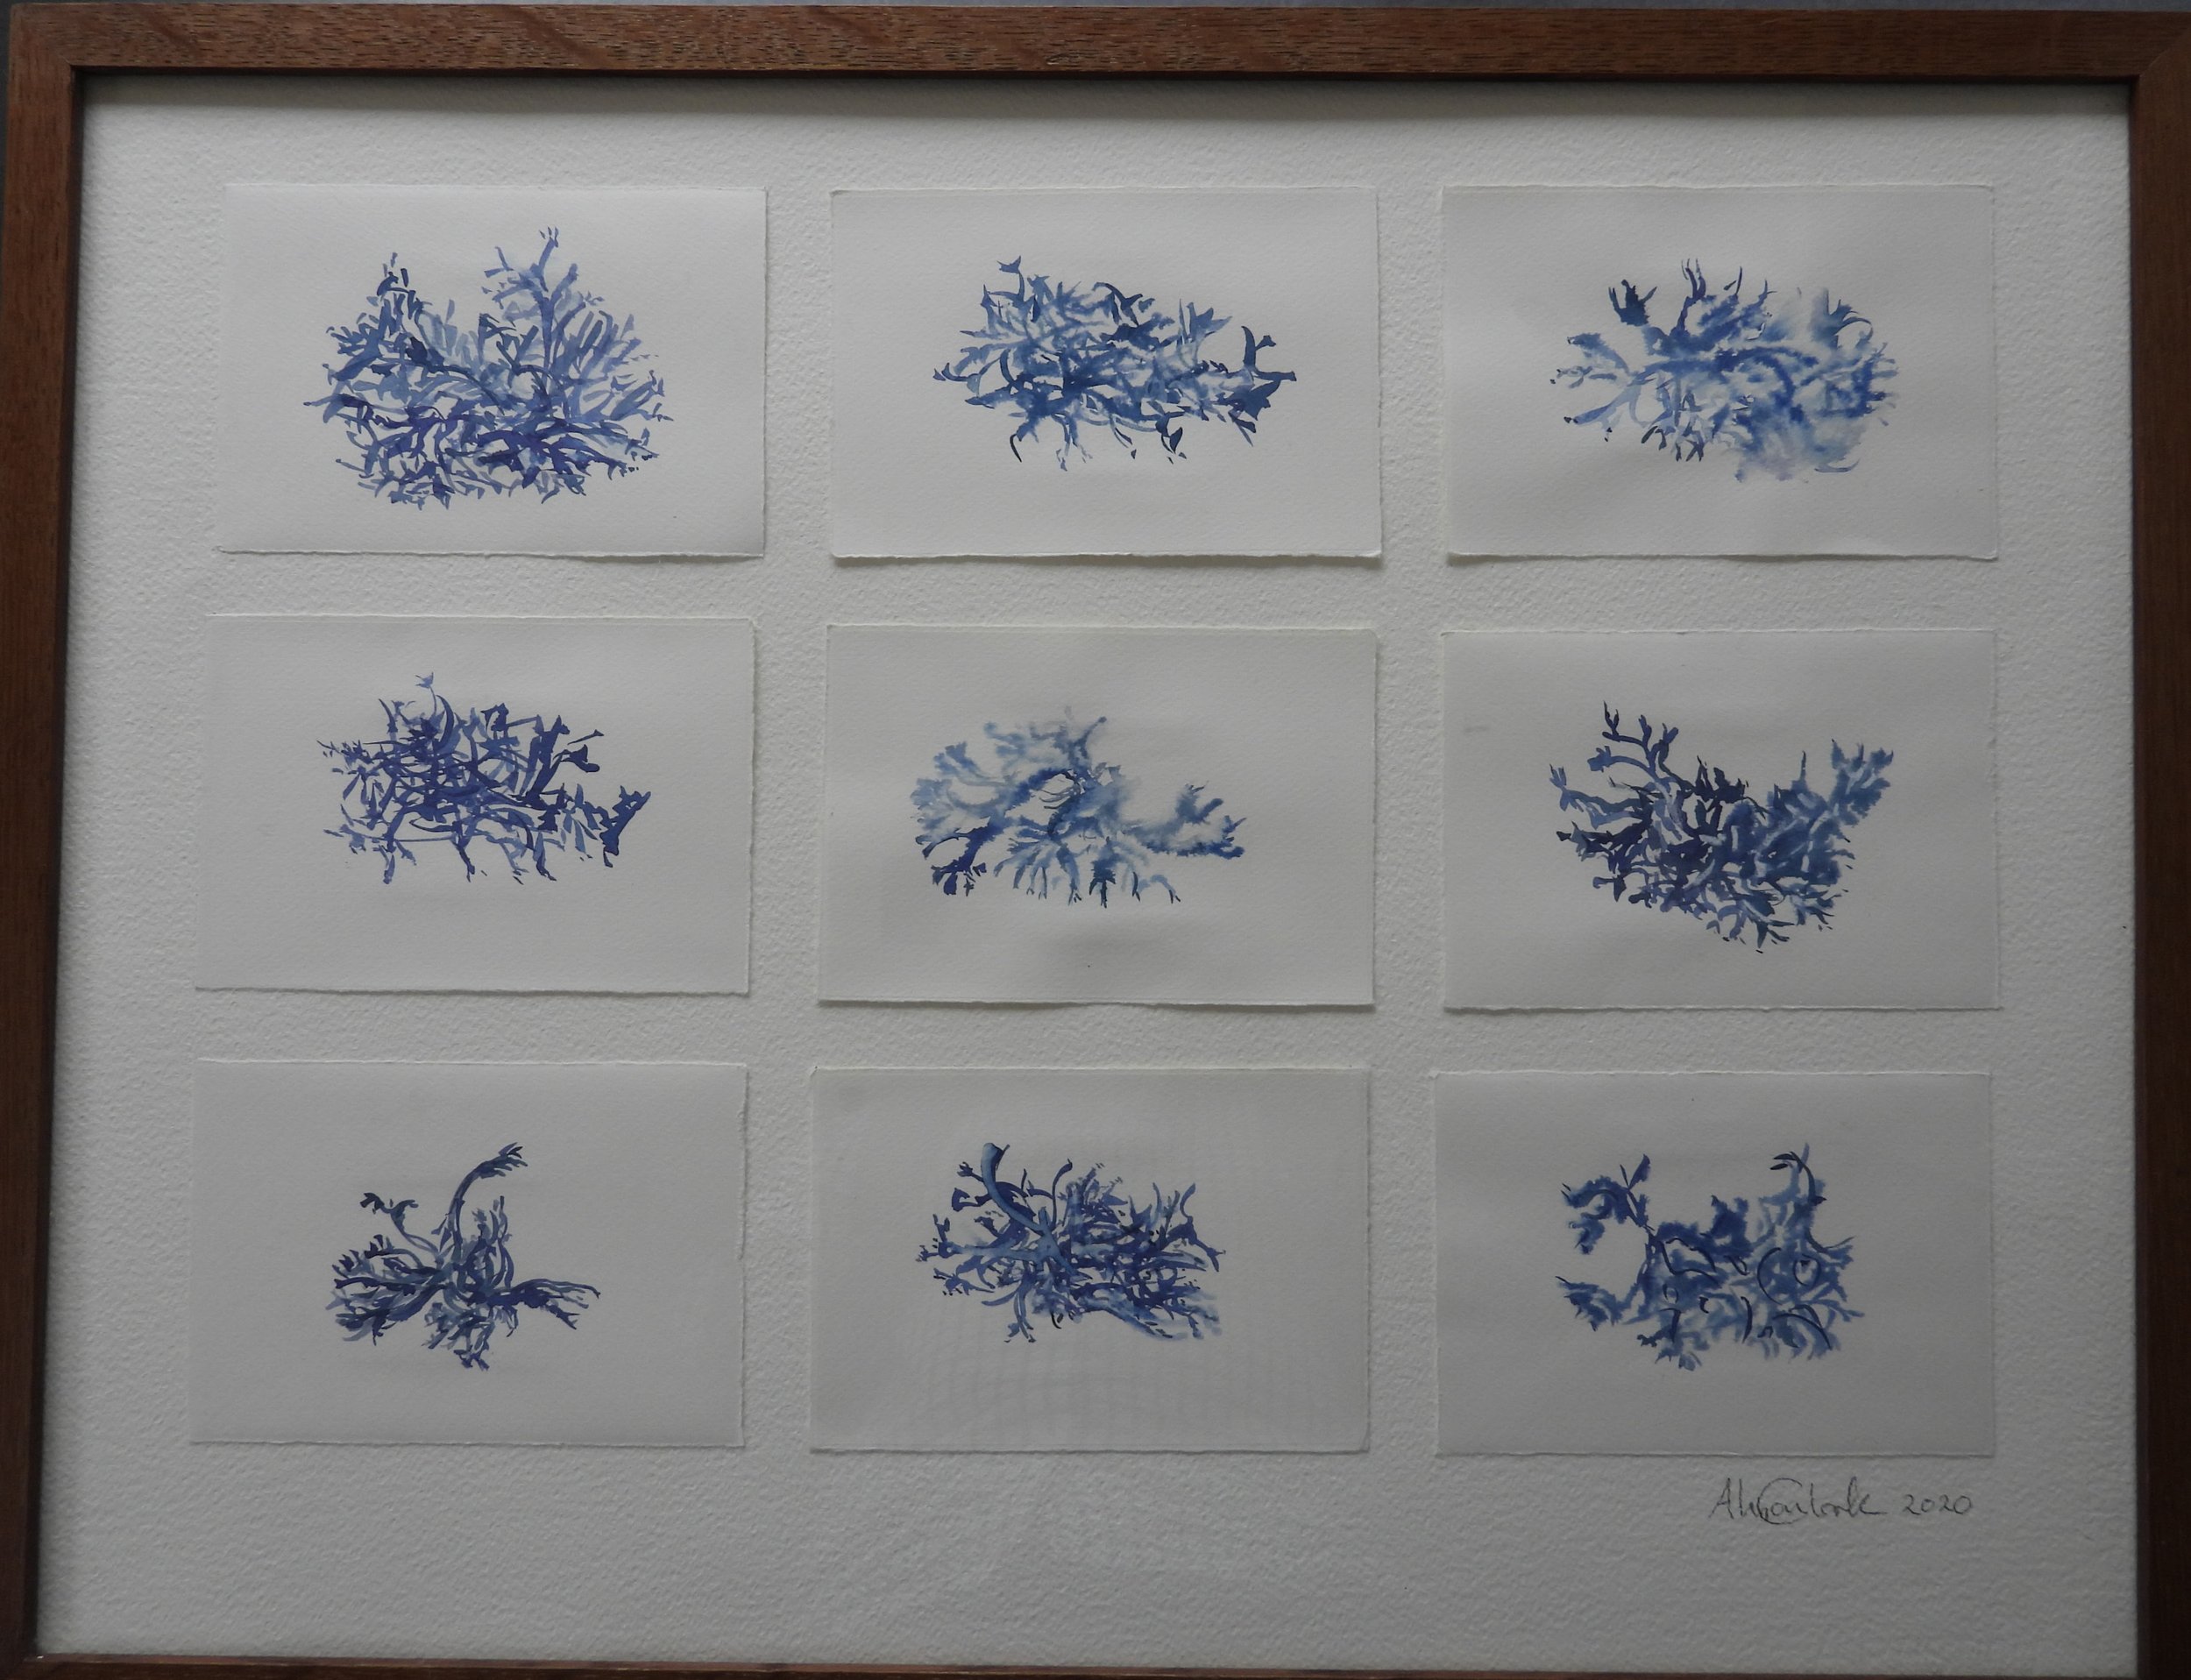  Blue Lichen II  (2020)	Series of 9 ink drawings on fabriano paper in repurposed frame. 68 x53cm. £350